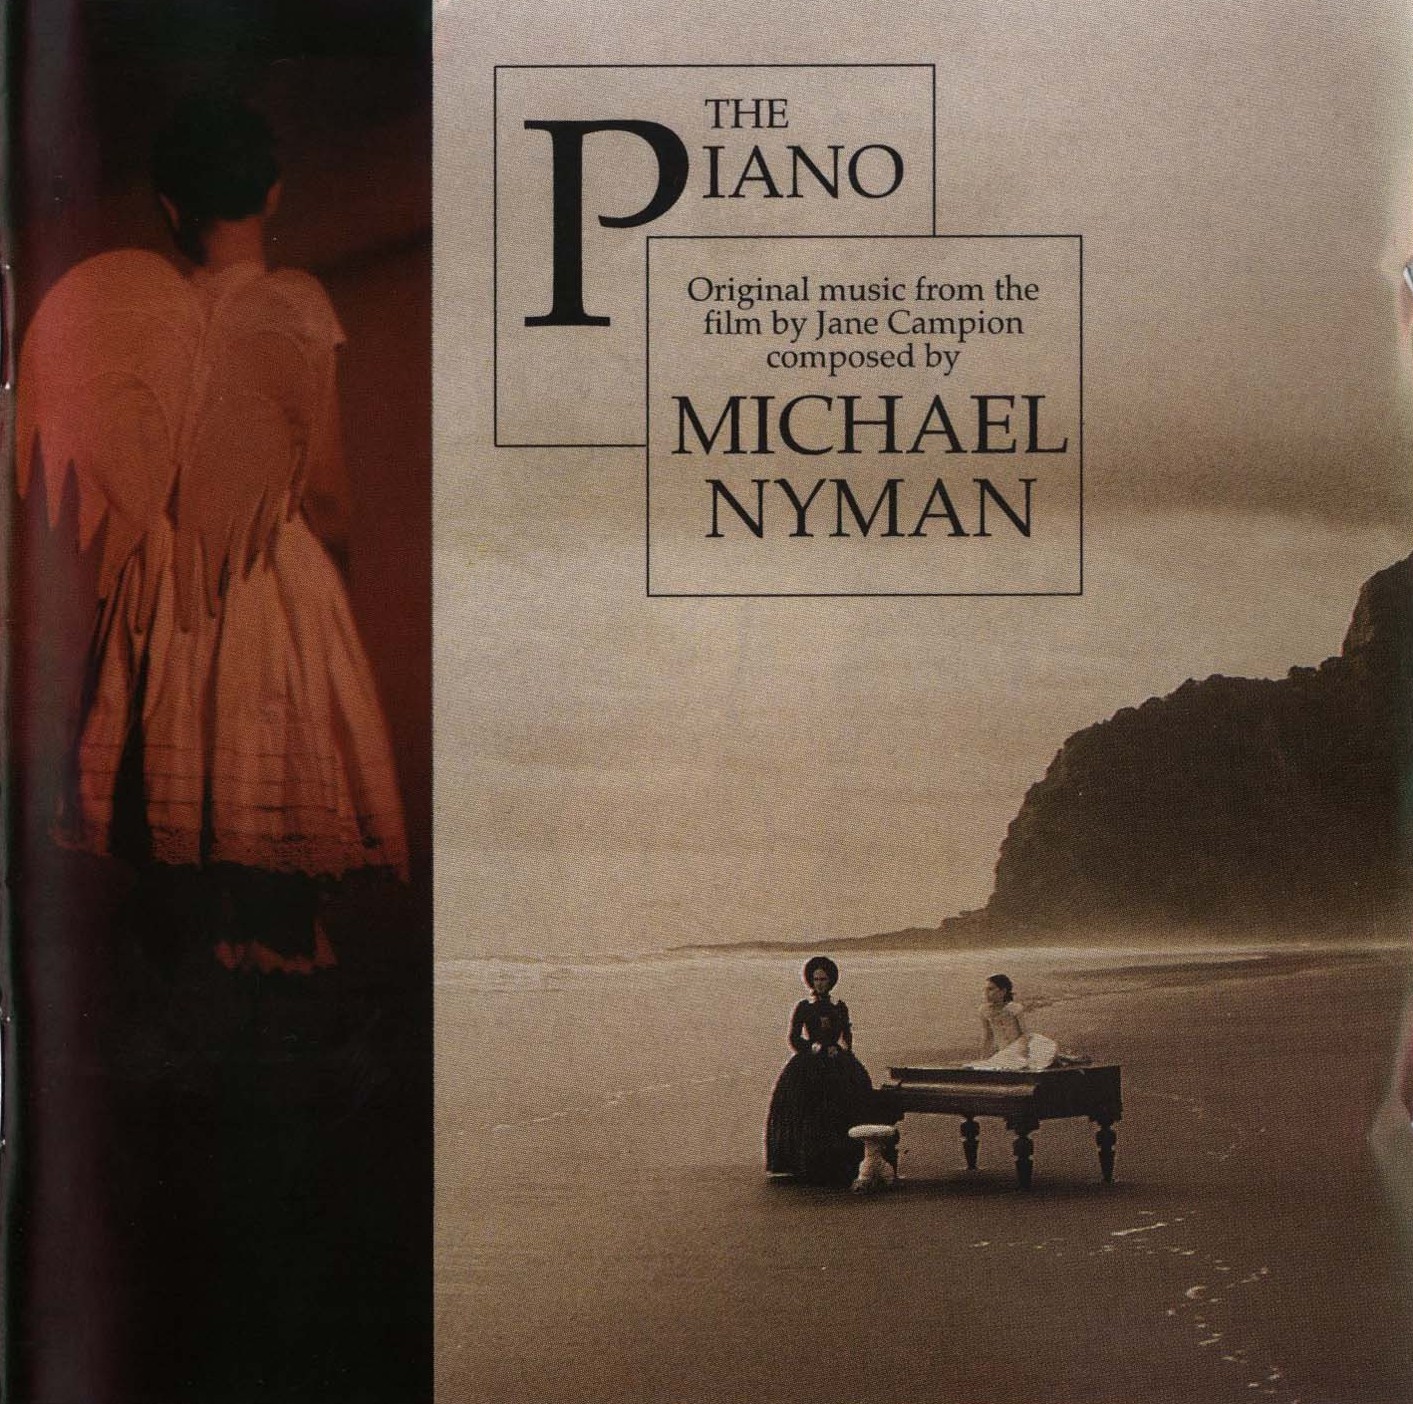 [[AllCDCovers]_michael_nyman_the_piano_2003_retail_cd-front.jpg]